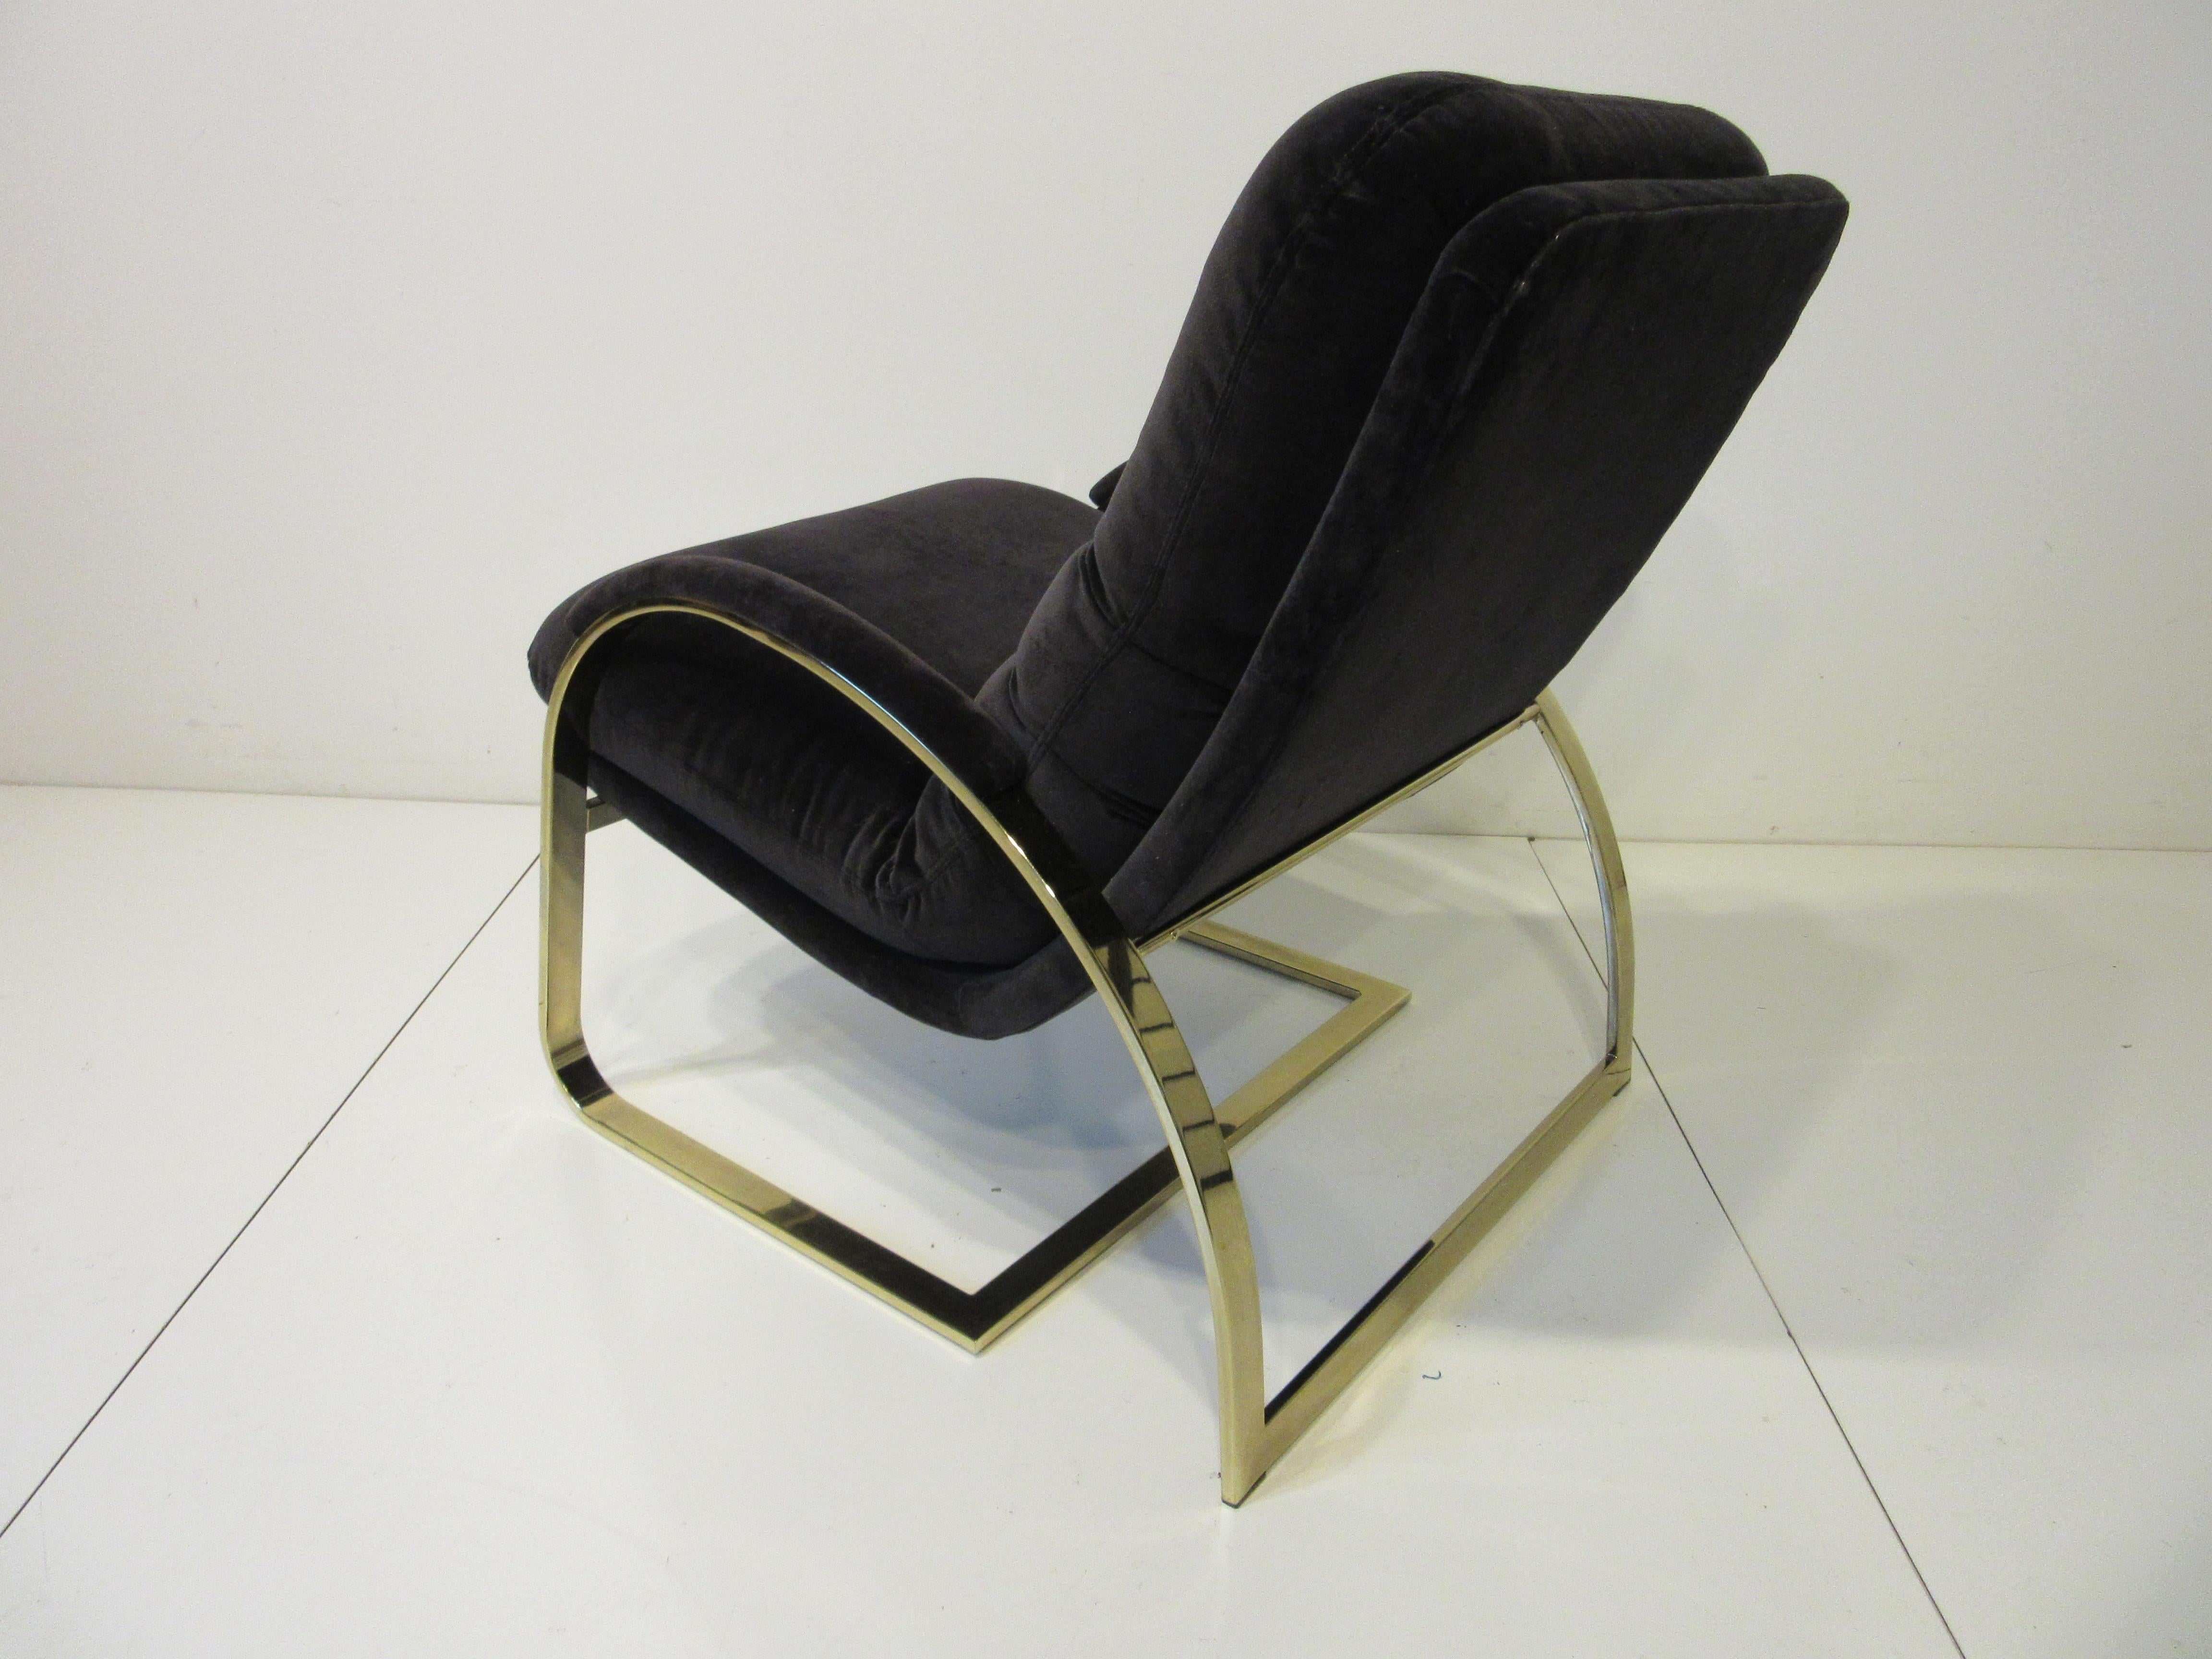 A sculptural brass framed lounge chair with padded arms and tufted back cushion having a higher back for comfort . The fabric is a very dark eggplant color in a soft velvet in the manner of Leon Pace and the Pace collection.